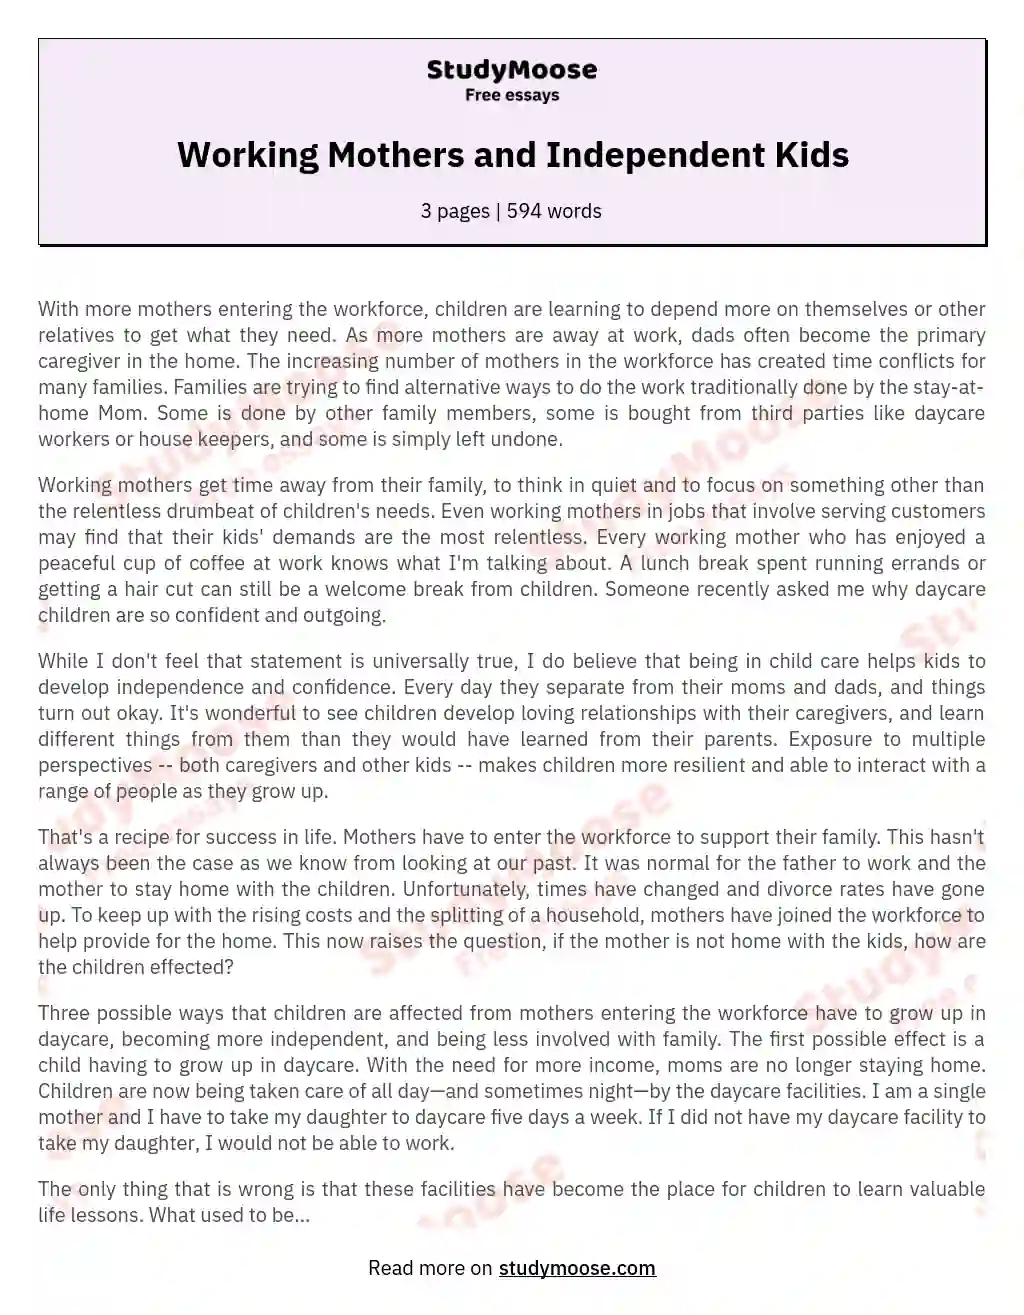 Working Mothers and Independent Kids